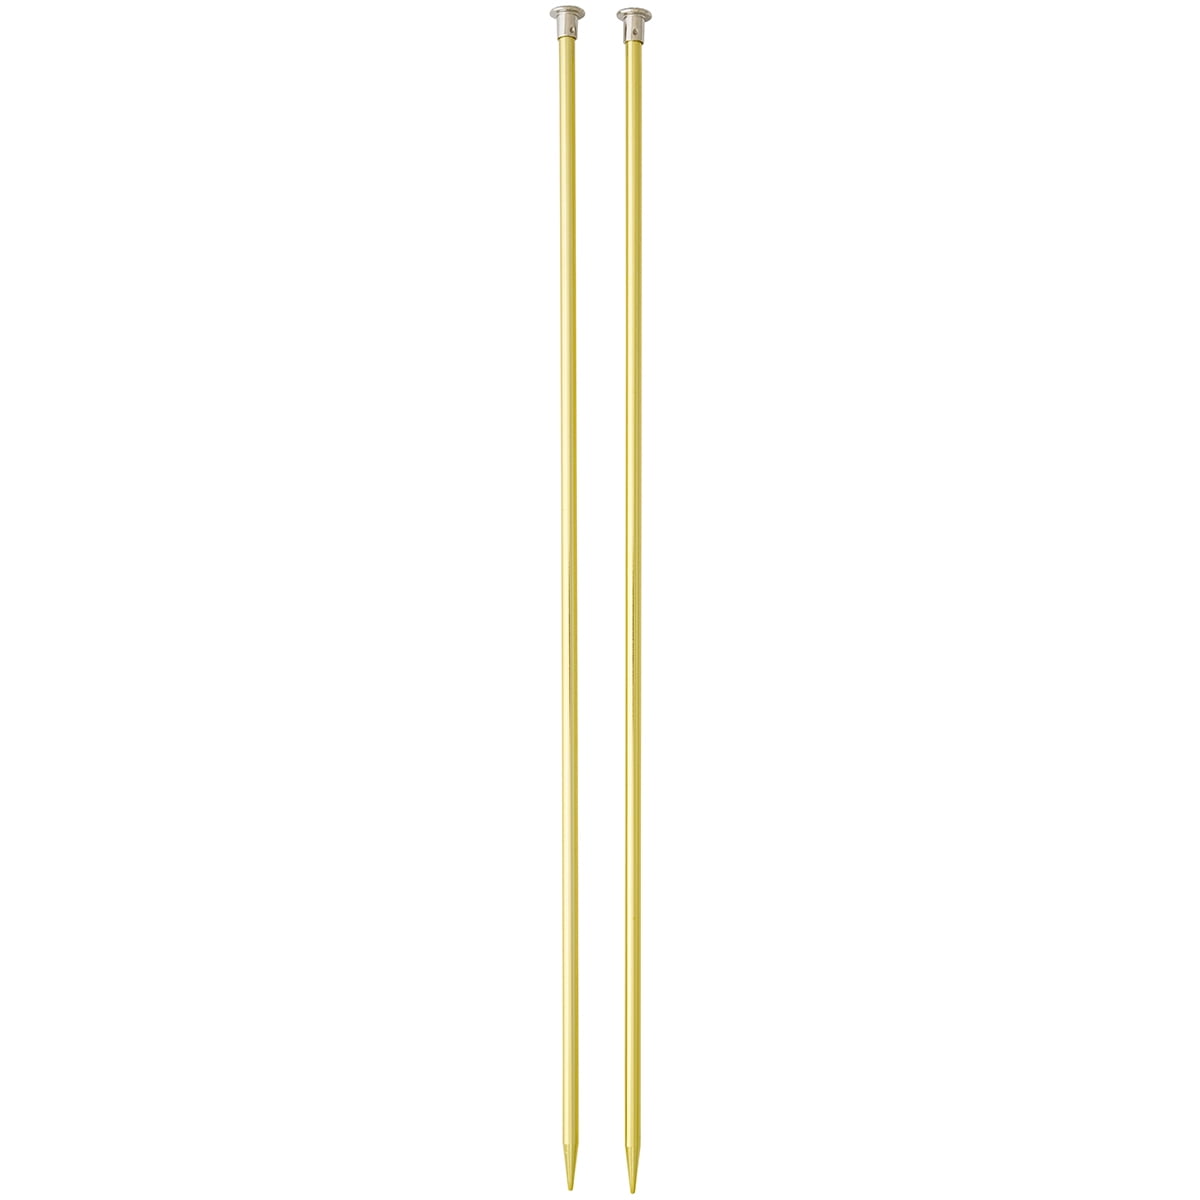 14 Anodized Aluminum Knitting Needles by Loops & Threads®